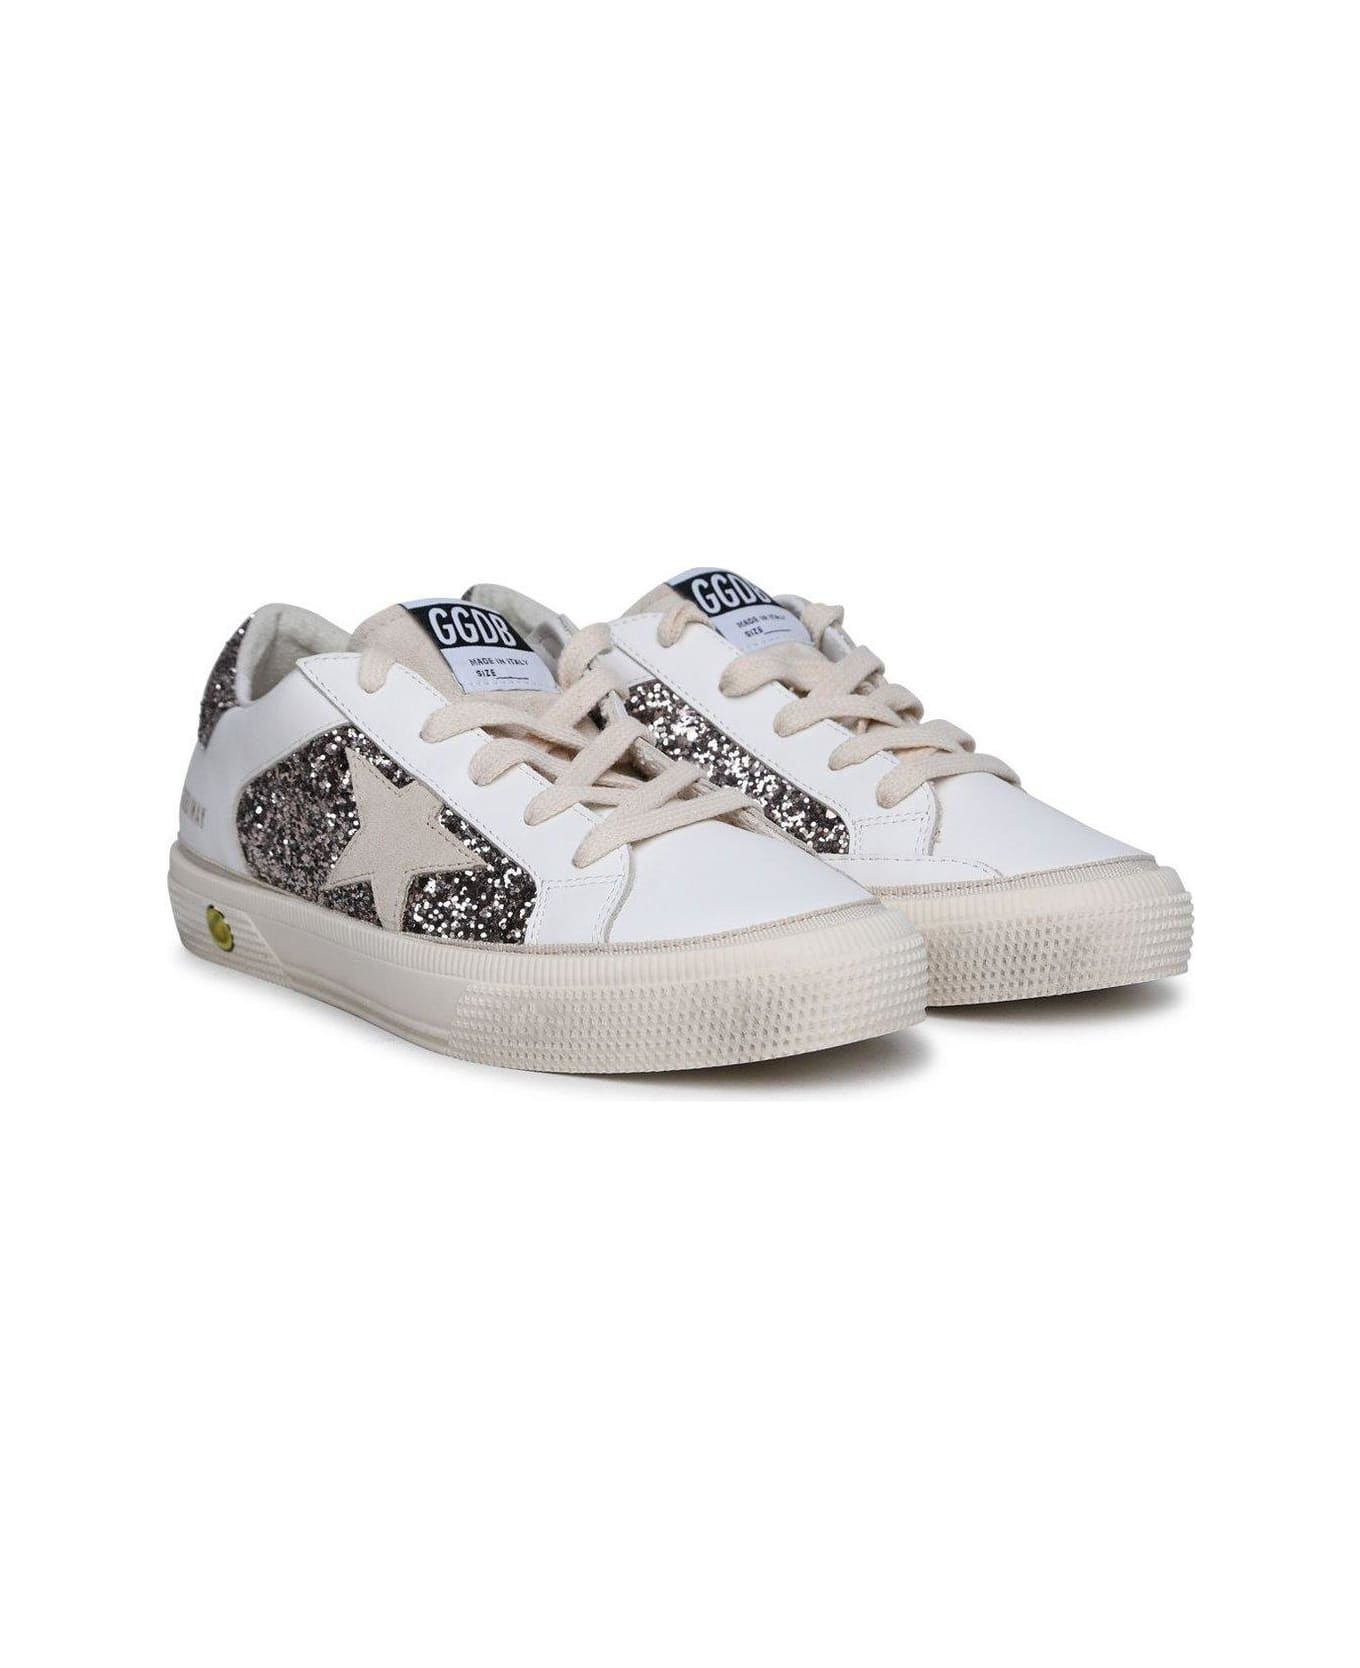 Golden Goose N May Star Glittered Sneakers - Optic white